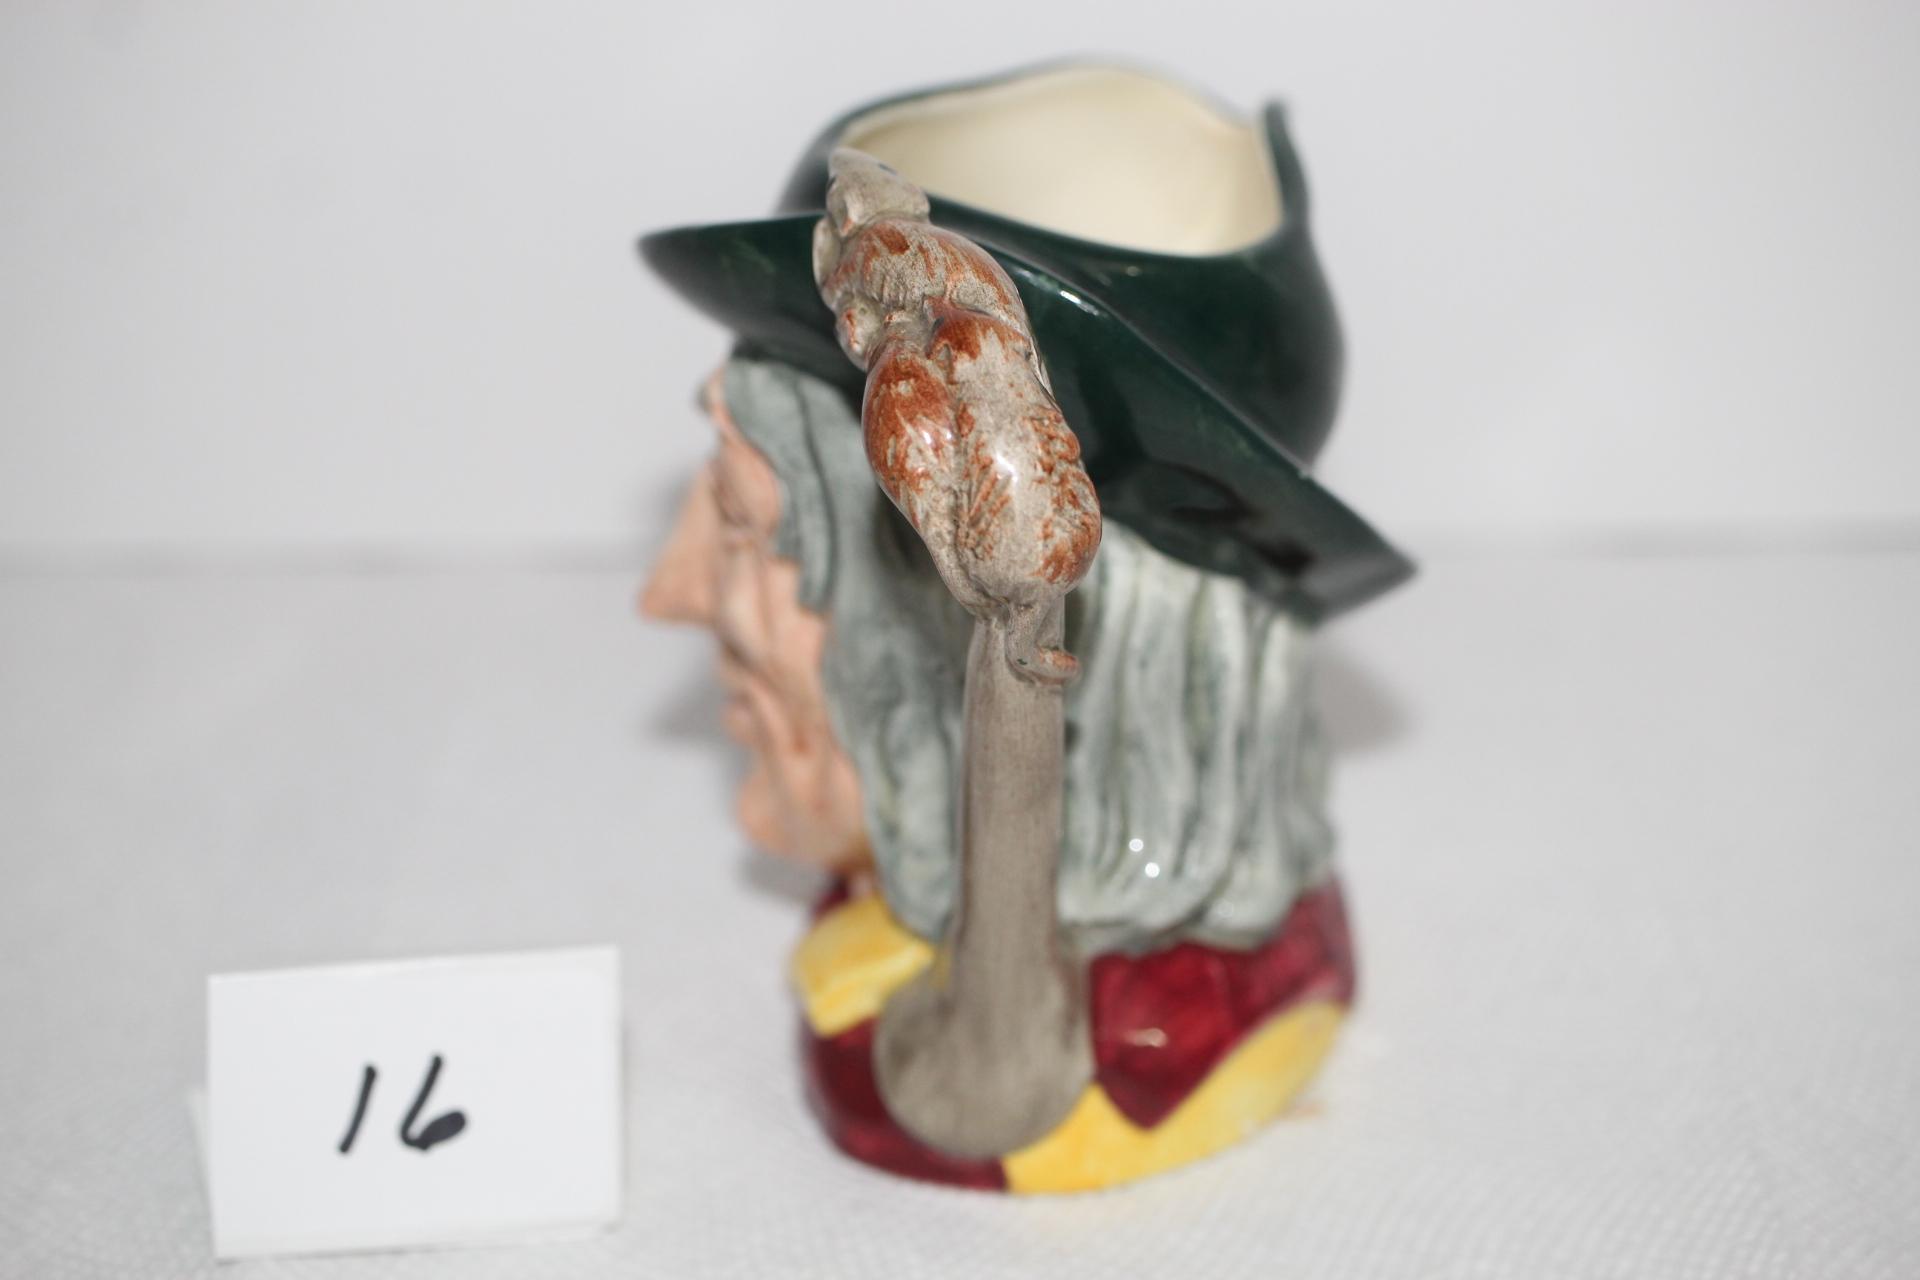 Vintage Royal Doulton "Pied Piper" Toby Jug, D6462, Made In England, Copr. 1953, 4 1/4"